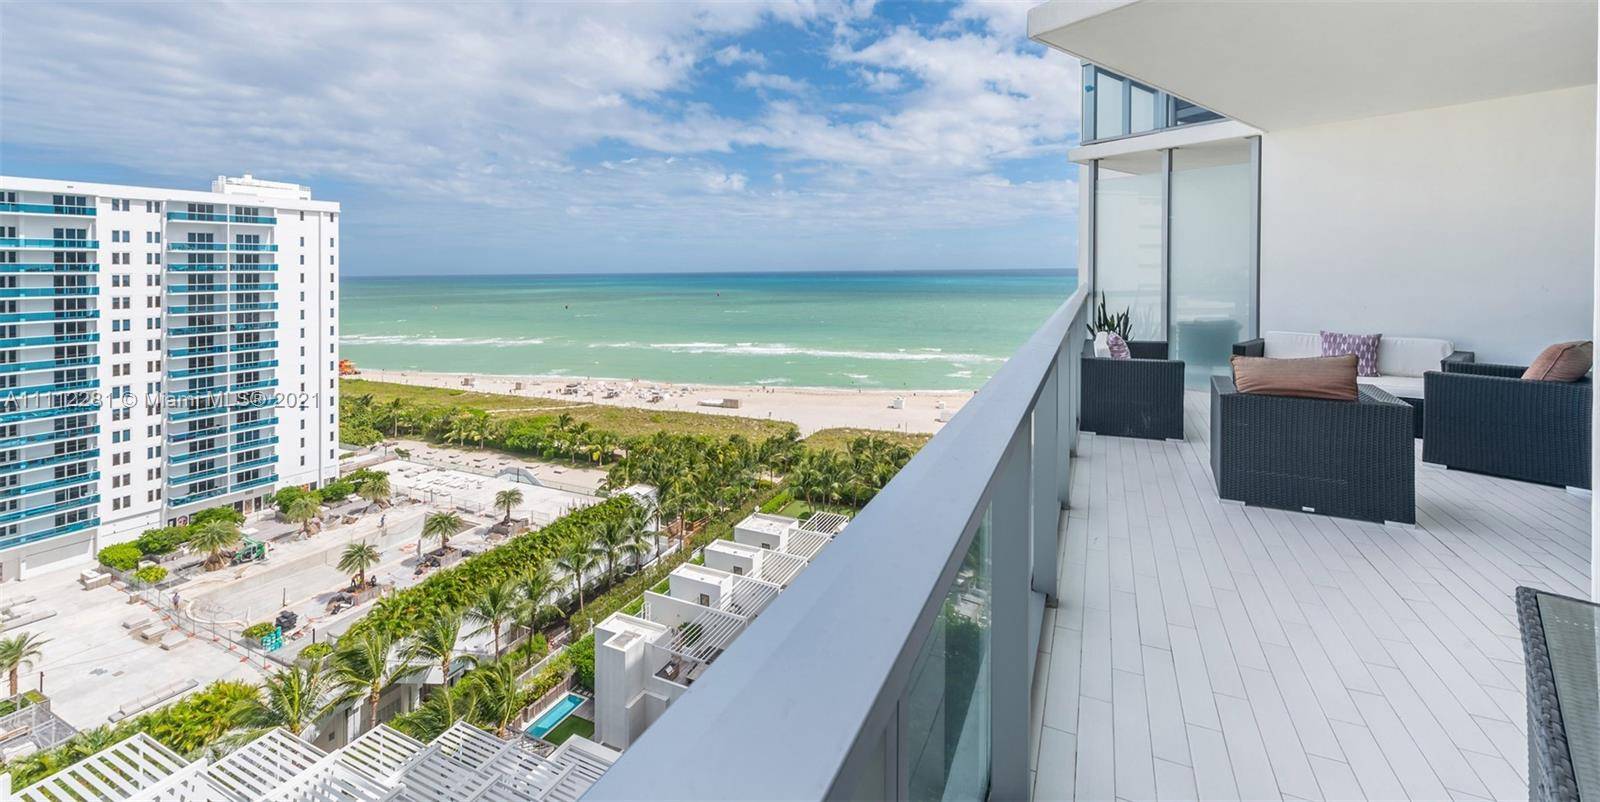 This south beach private residence at the W Hotel allows you to enjoy a waterfront location, footsteps from the beautiful white sand beach.